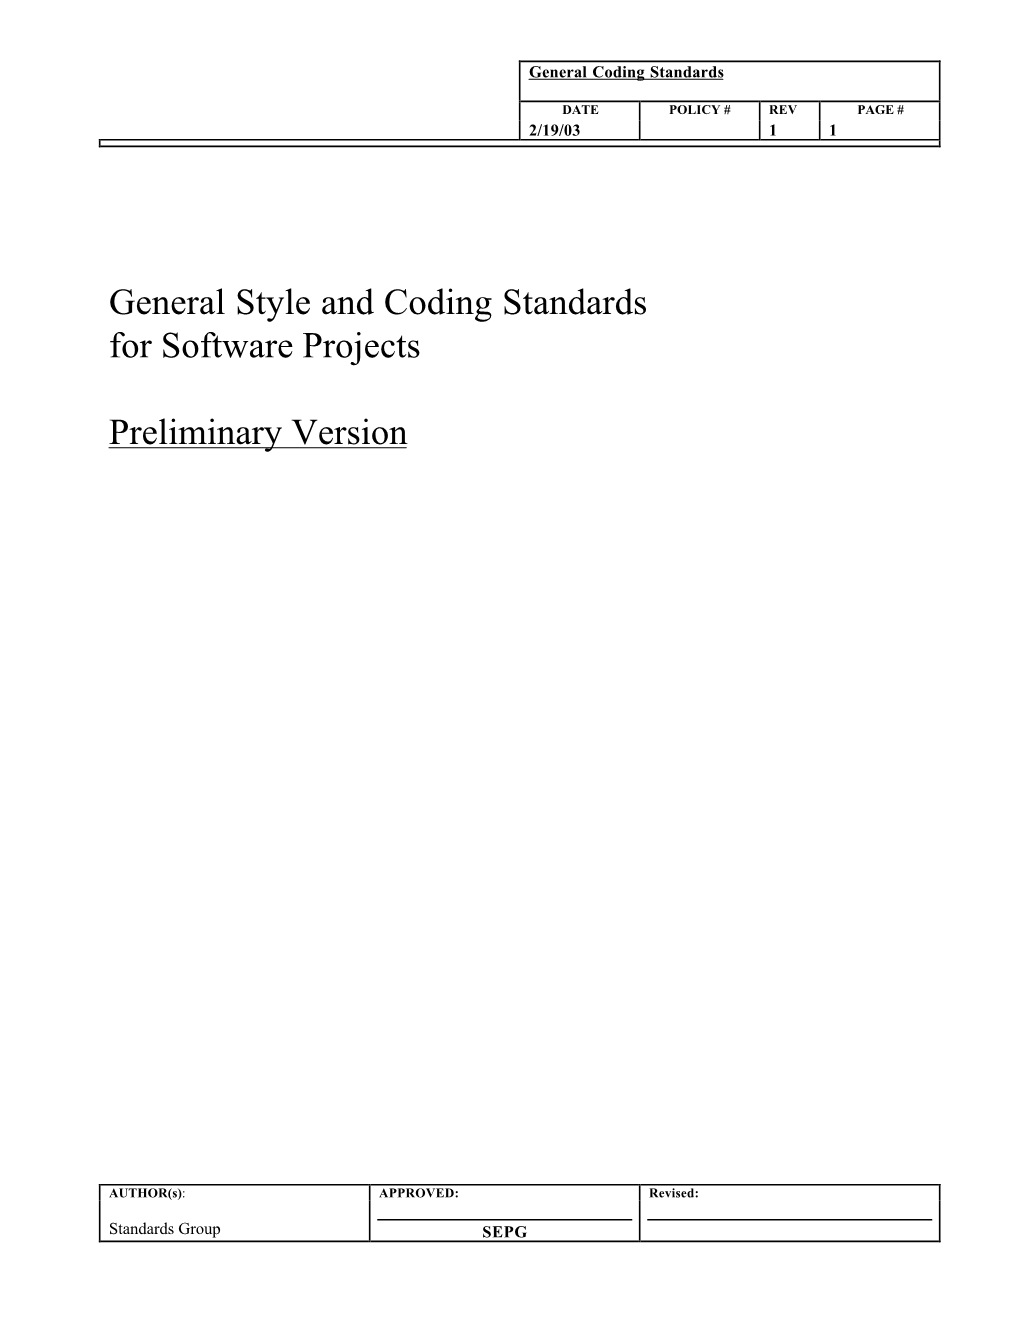 General Style and Coding Standards for Software Projects